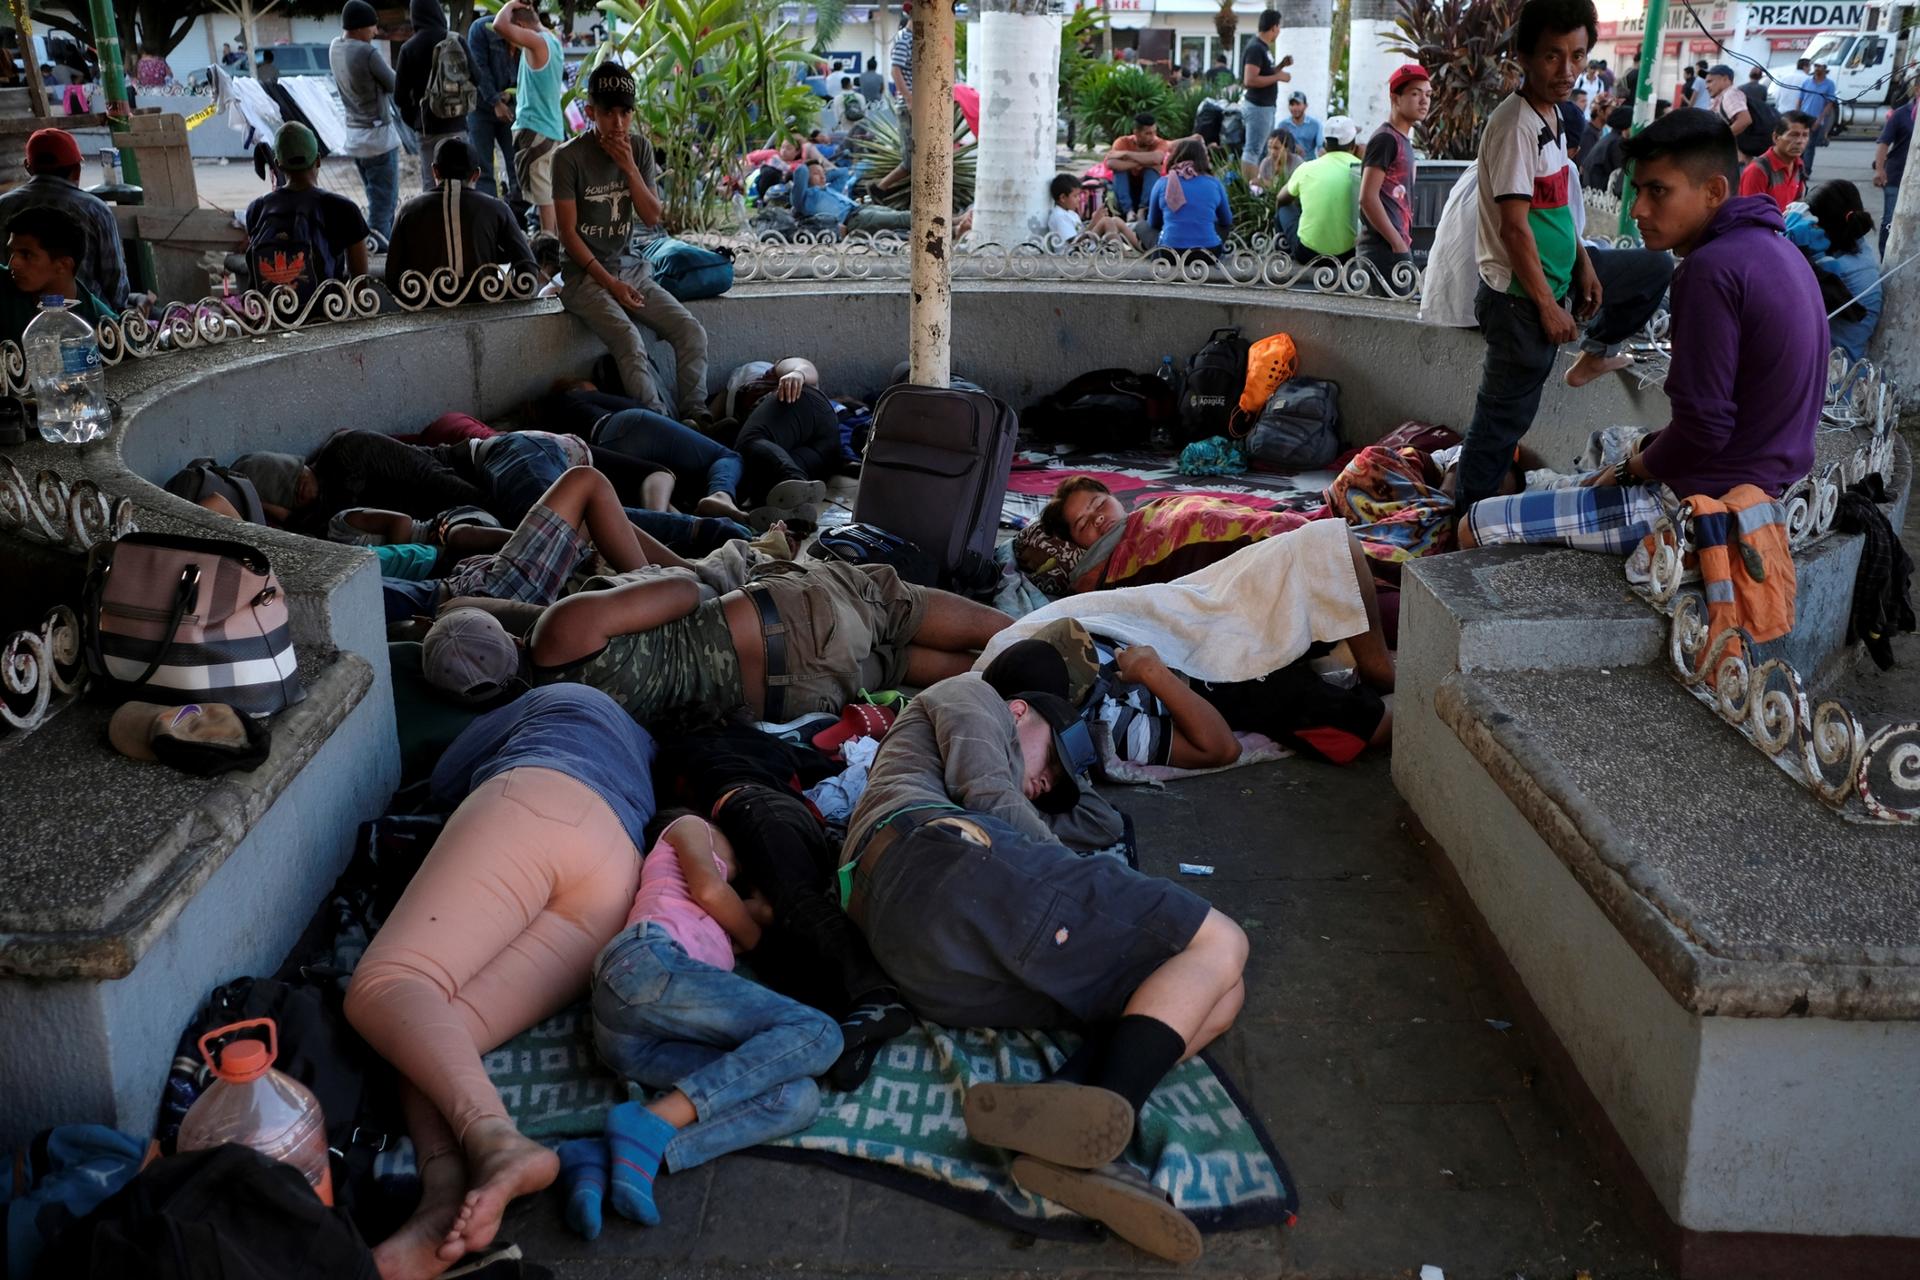 A group of people sleep in a concrete structure in a public park 